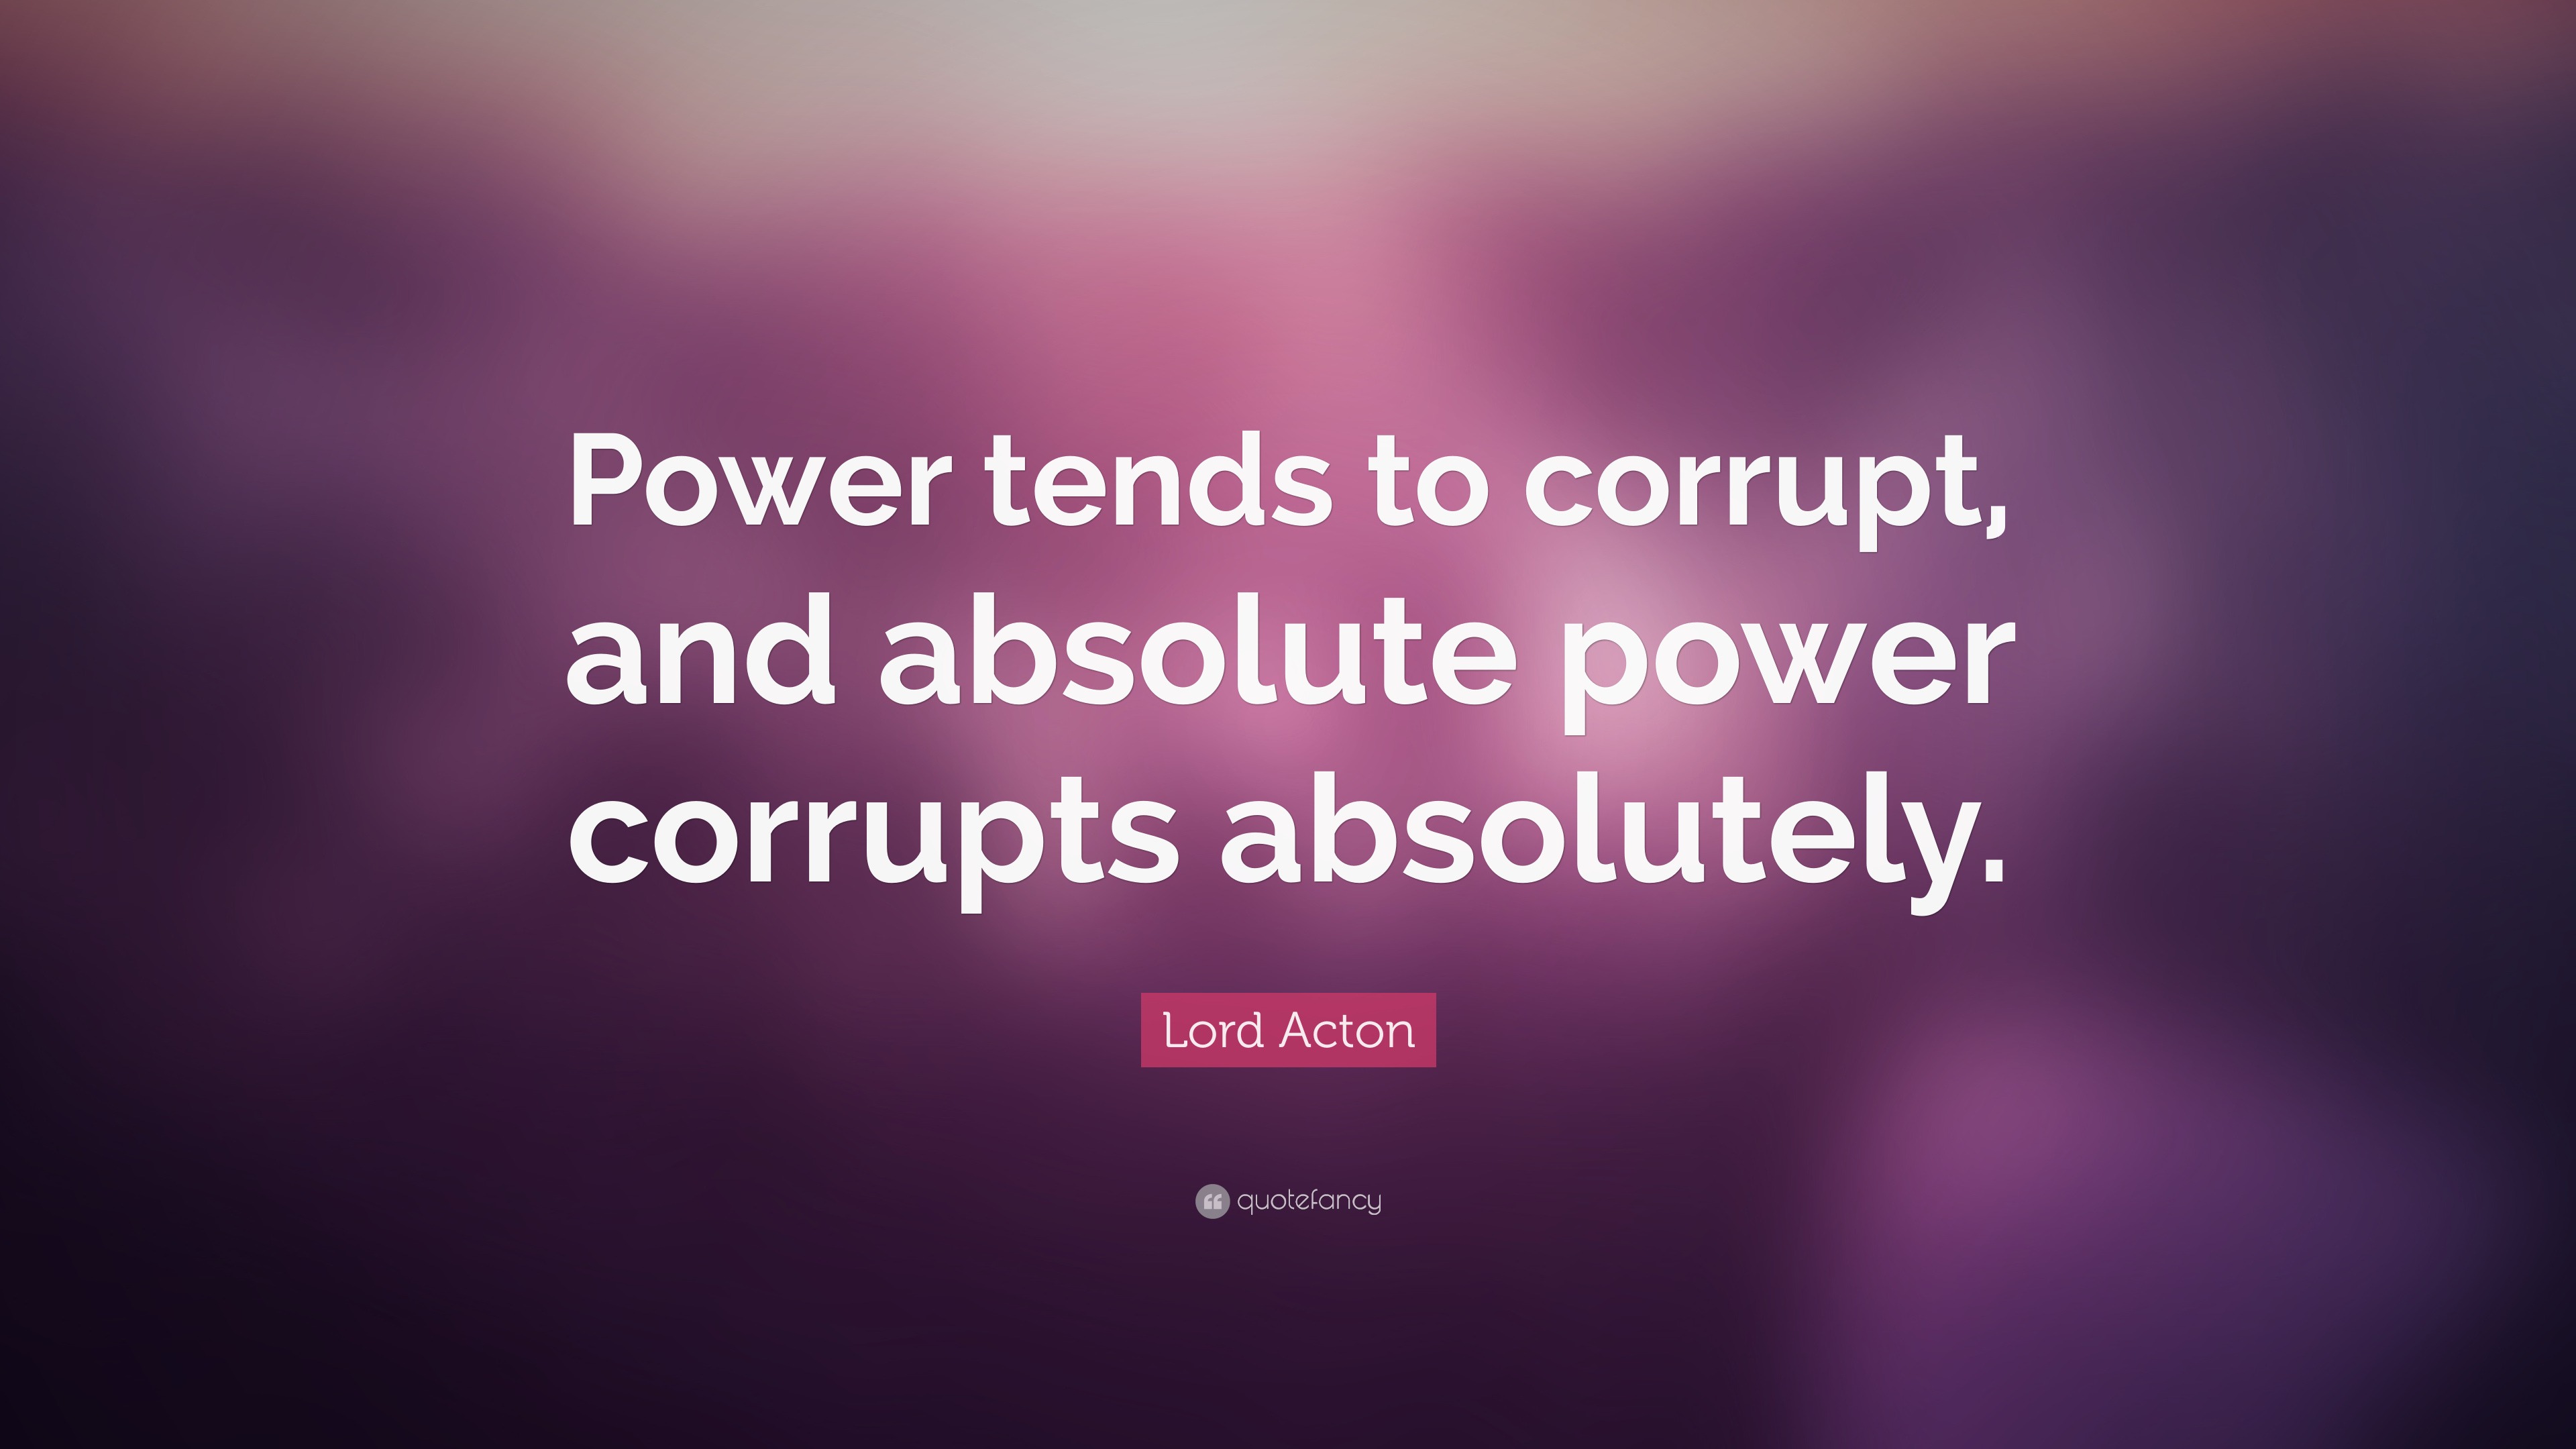 power tends to corrupt absolute power corrupts absolutely